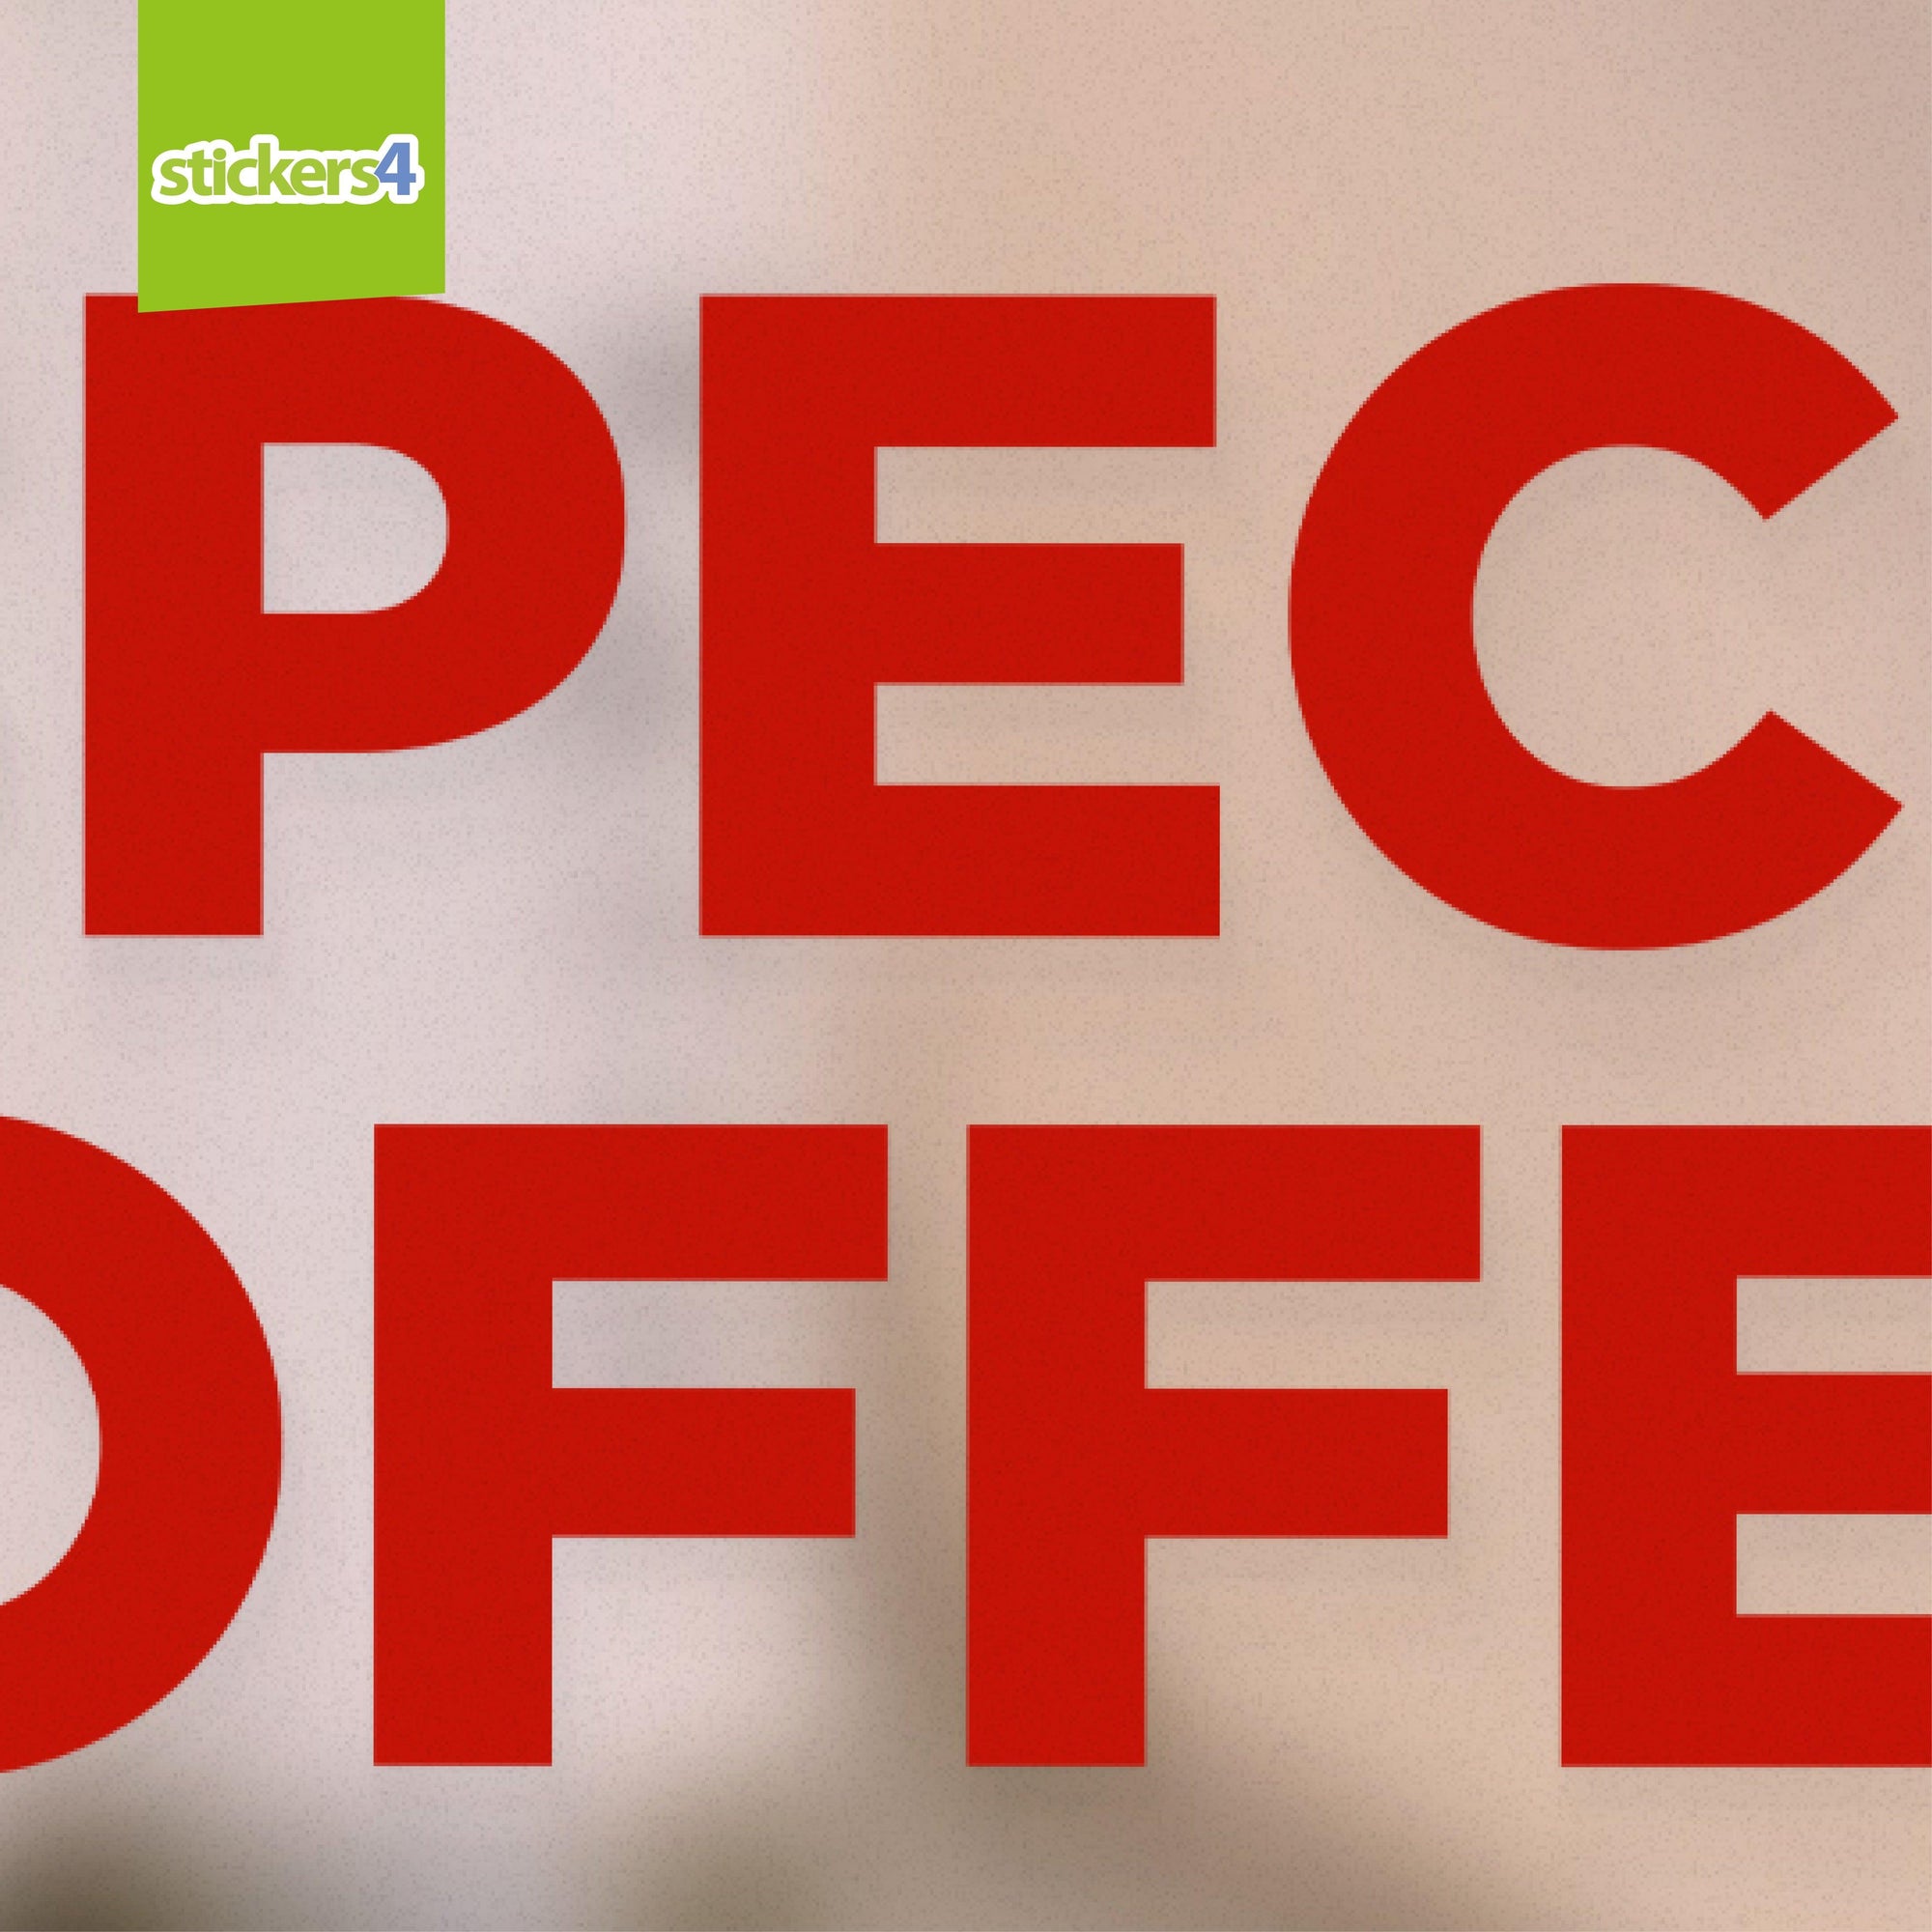 Large SPECIAL OFFERS Shop Window Sticker - Red on Clear Promotions